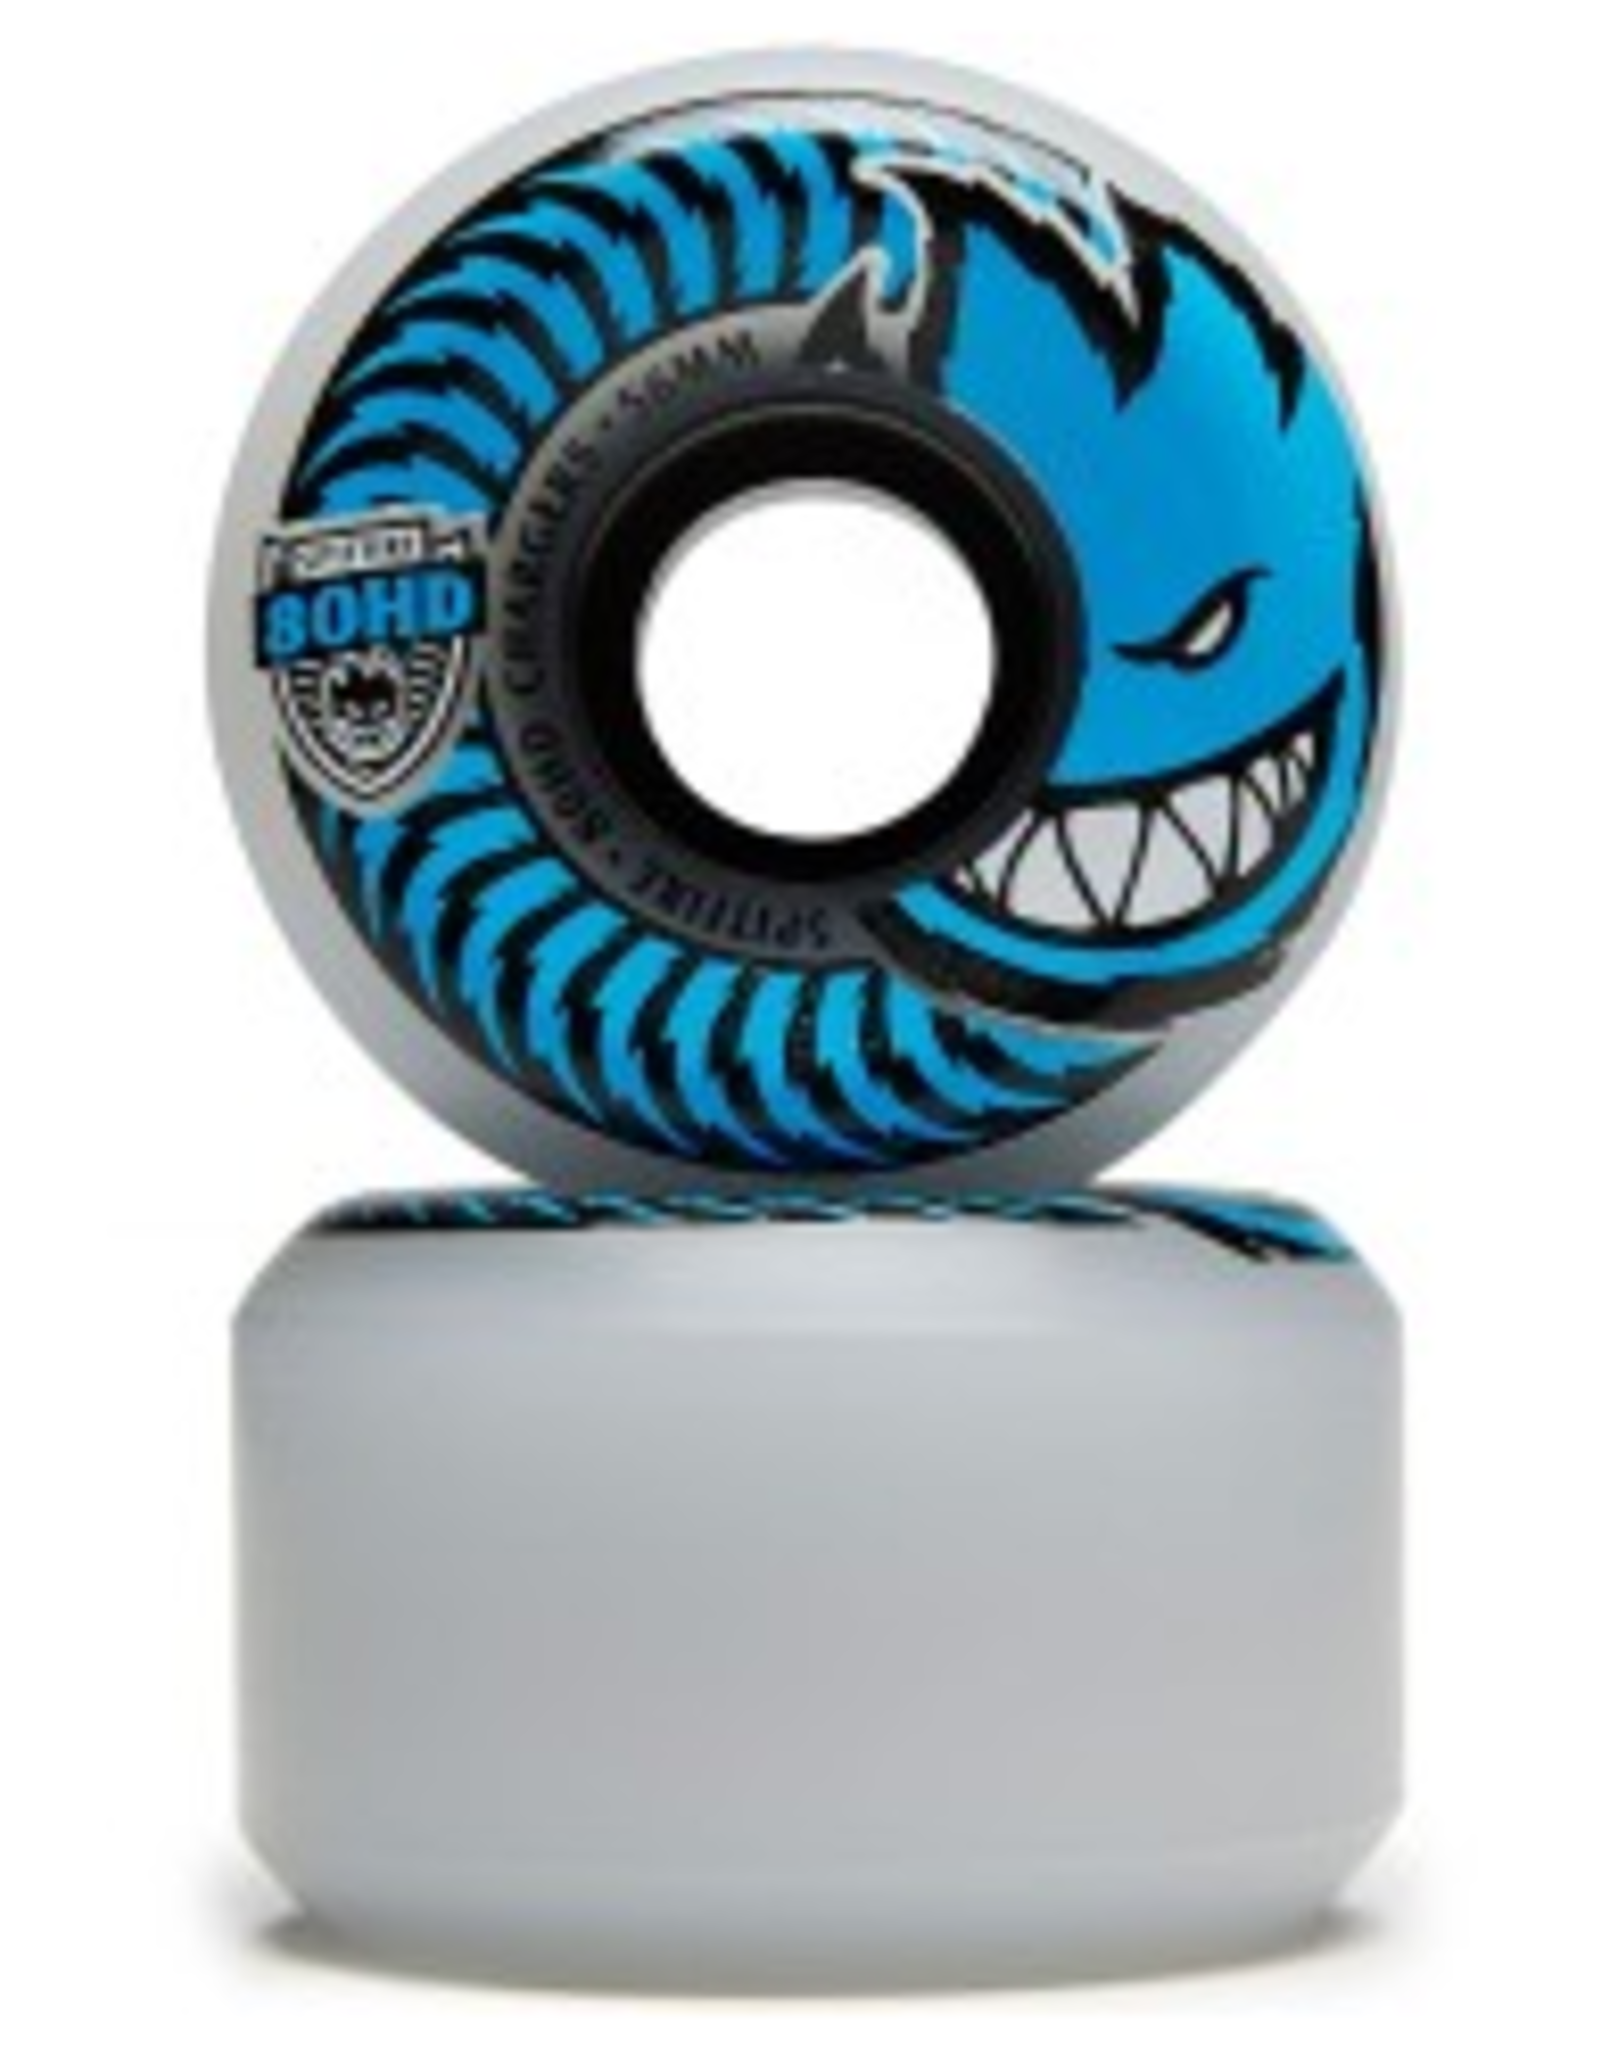 SPITFIRE SPITFIRE 58MM 80HD SOFT CONICAL CLEAR WHEELS